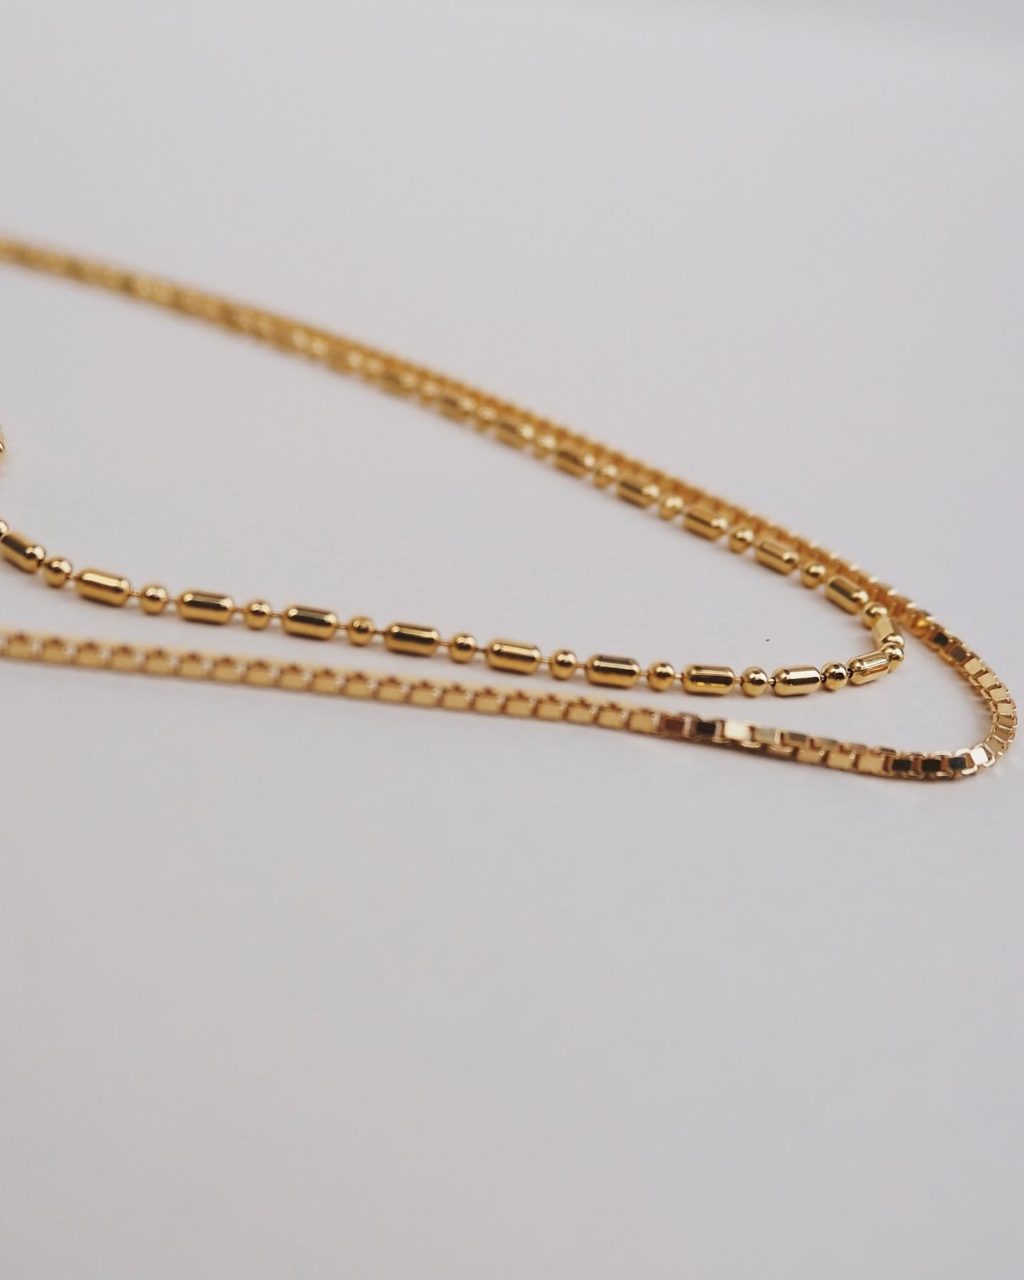 Bead chain gold in 42 cm cm from the Faces collection. Hasla Jewelry, Norwegian design.